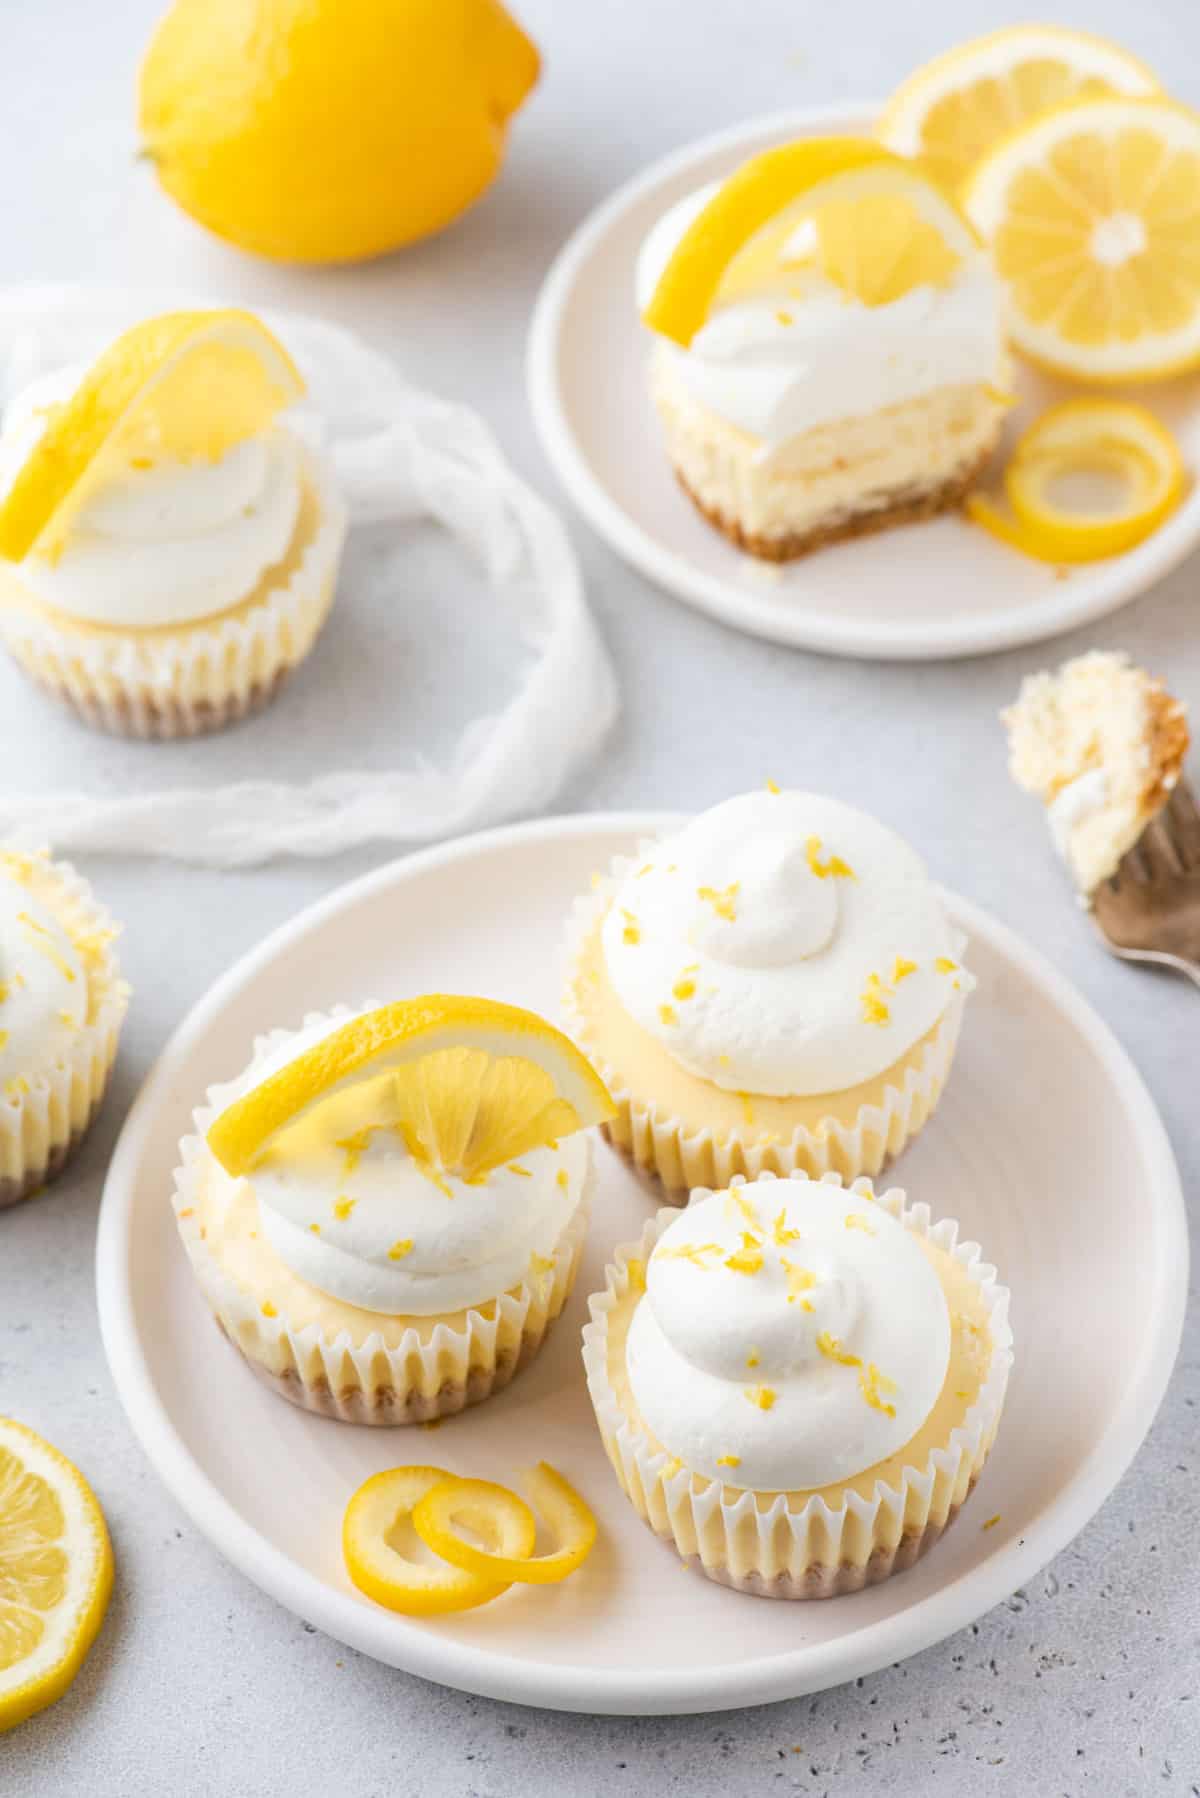 Mini lemon cheesecakes topped with whipped cream and lemon zest arranged on white plates